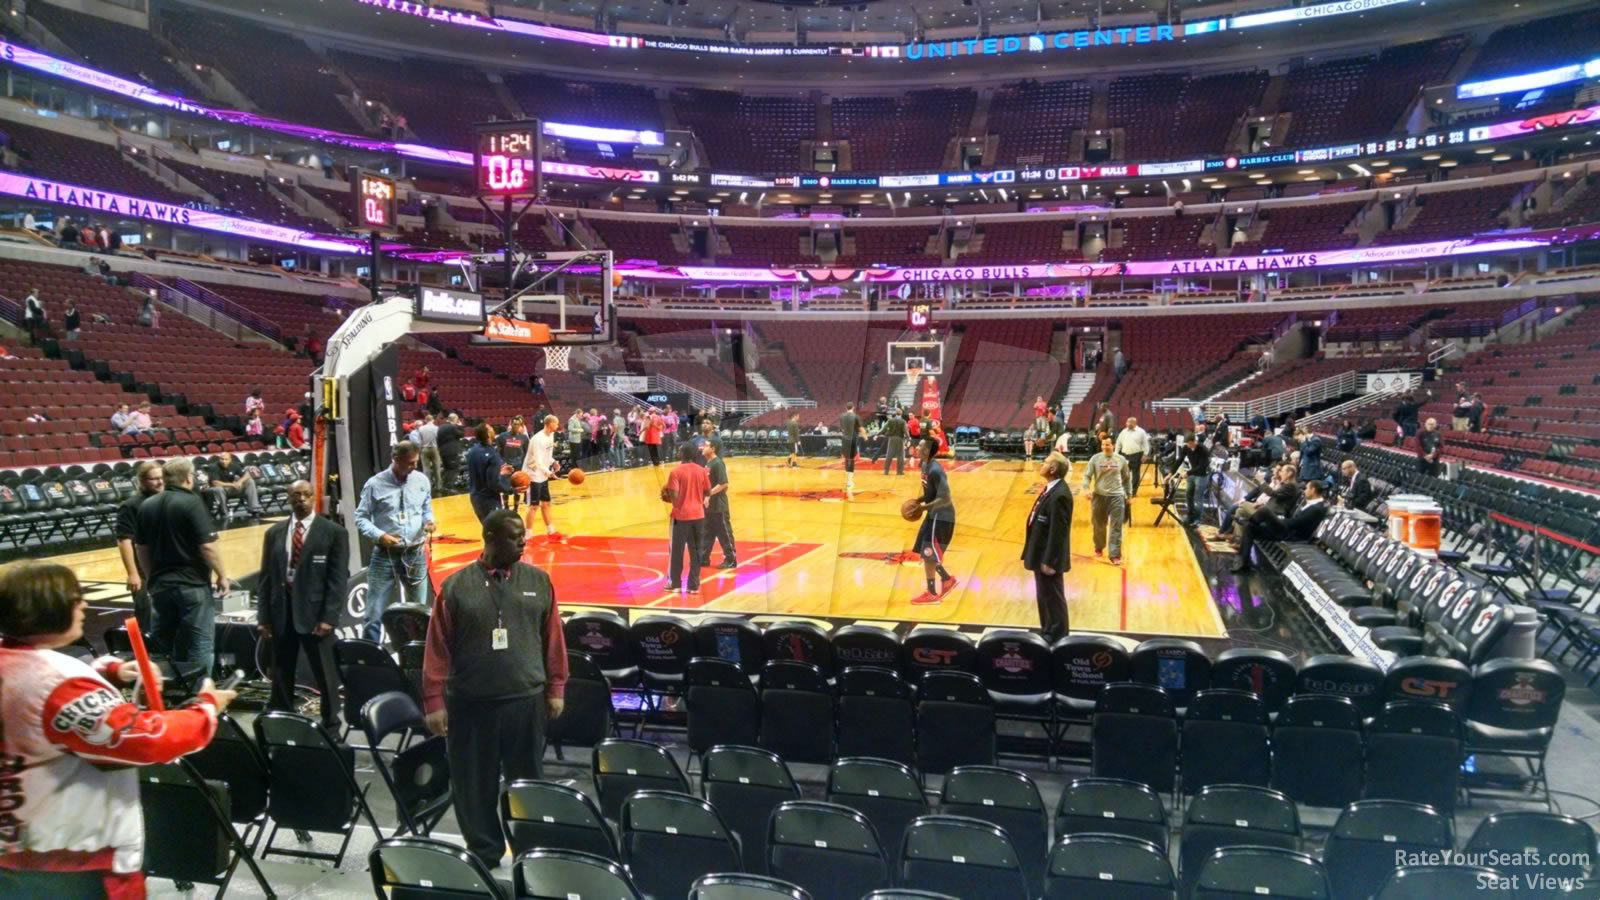 Chicago Bulls - United Center Section 105 - RateYourSeats.com